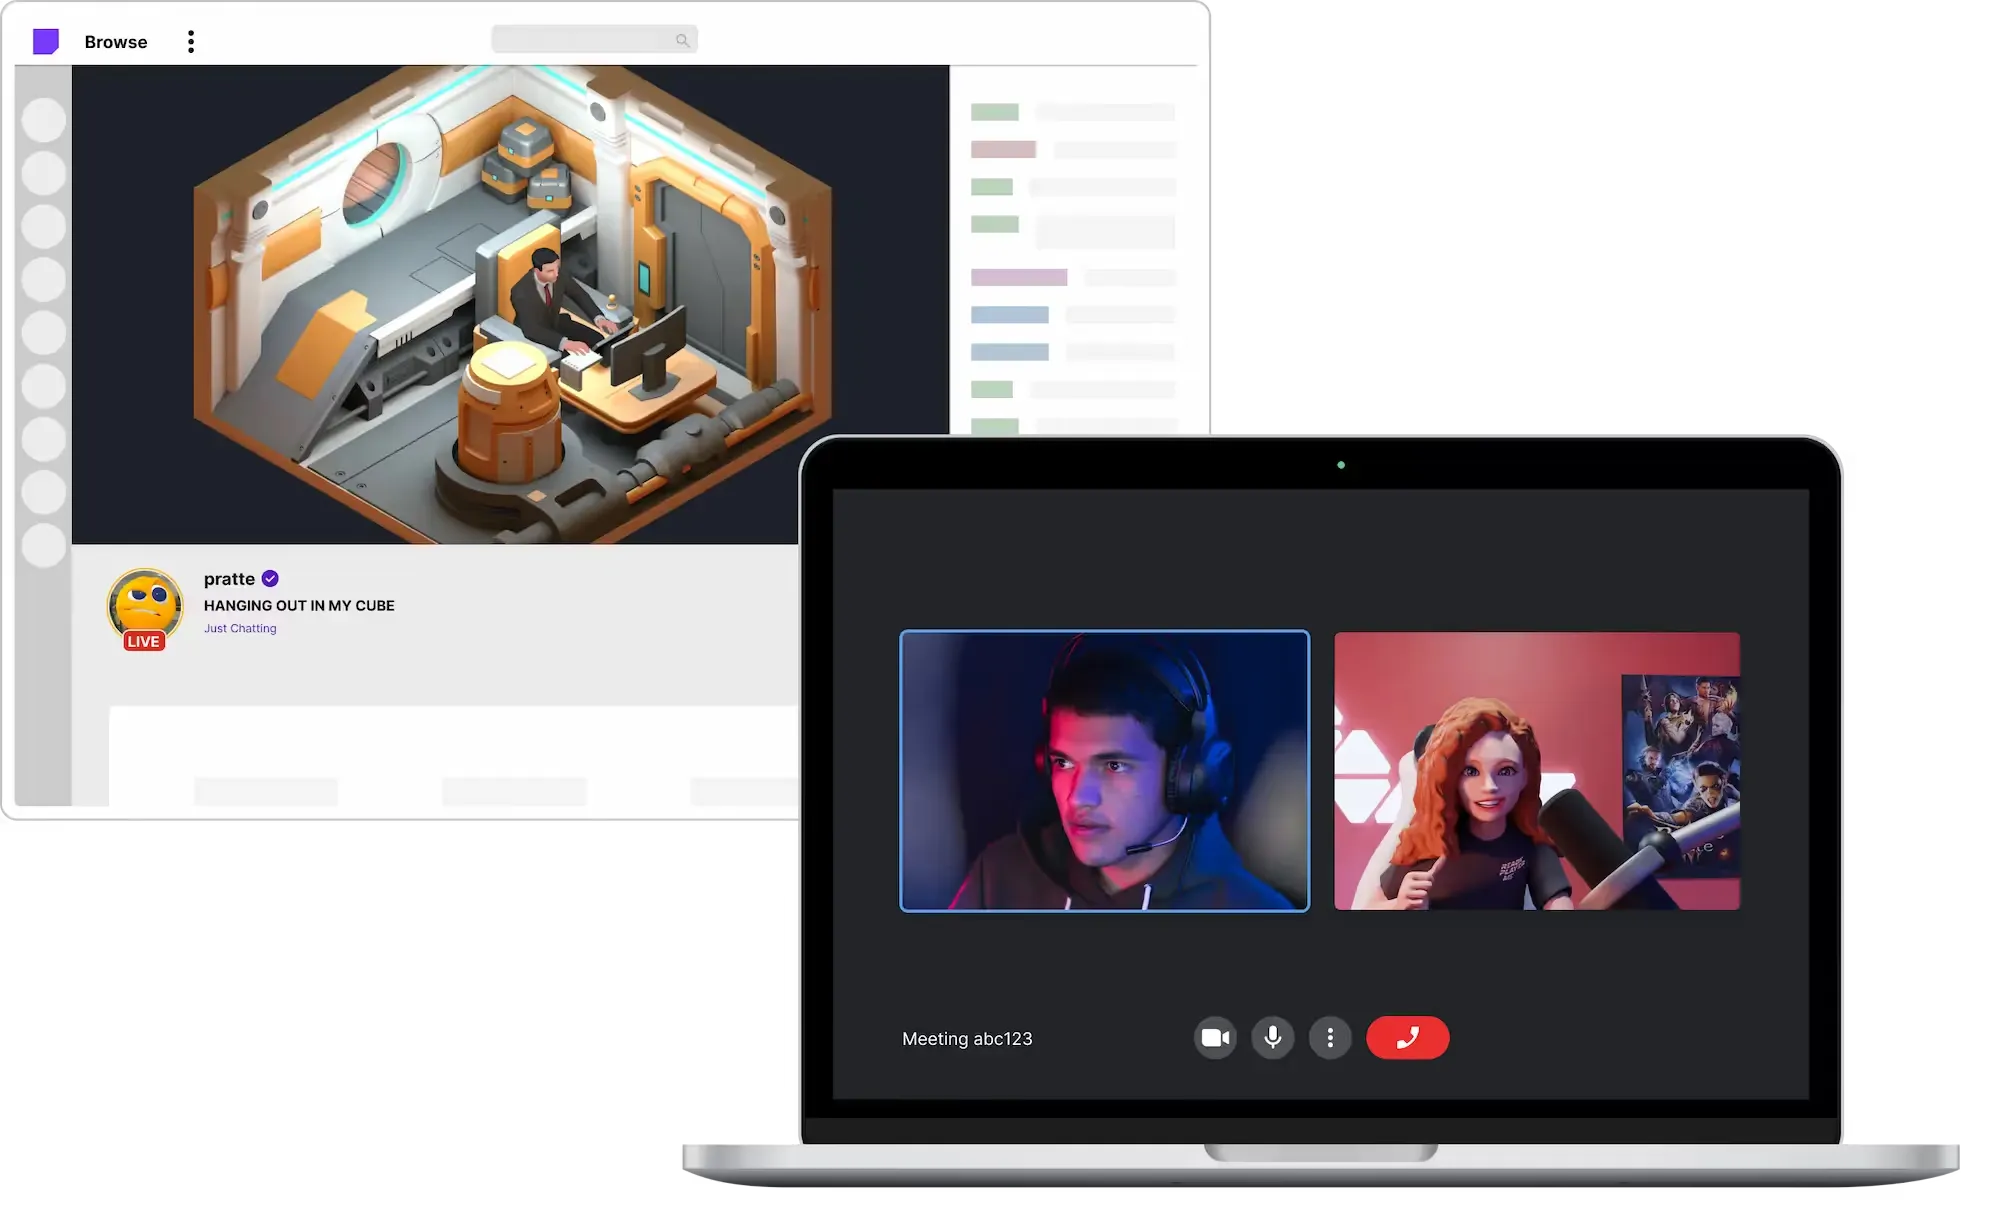 Laptop open to a video call with one user showing a video feed of themself and the other appearing as a 3D character. Behind it is a screenshot of a streaming service showing a 3D character seated in an isometric room